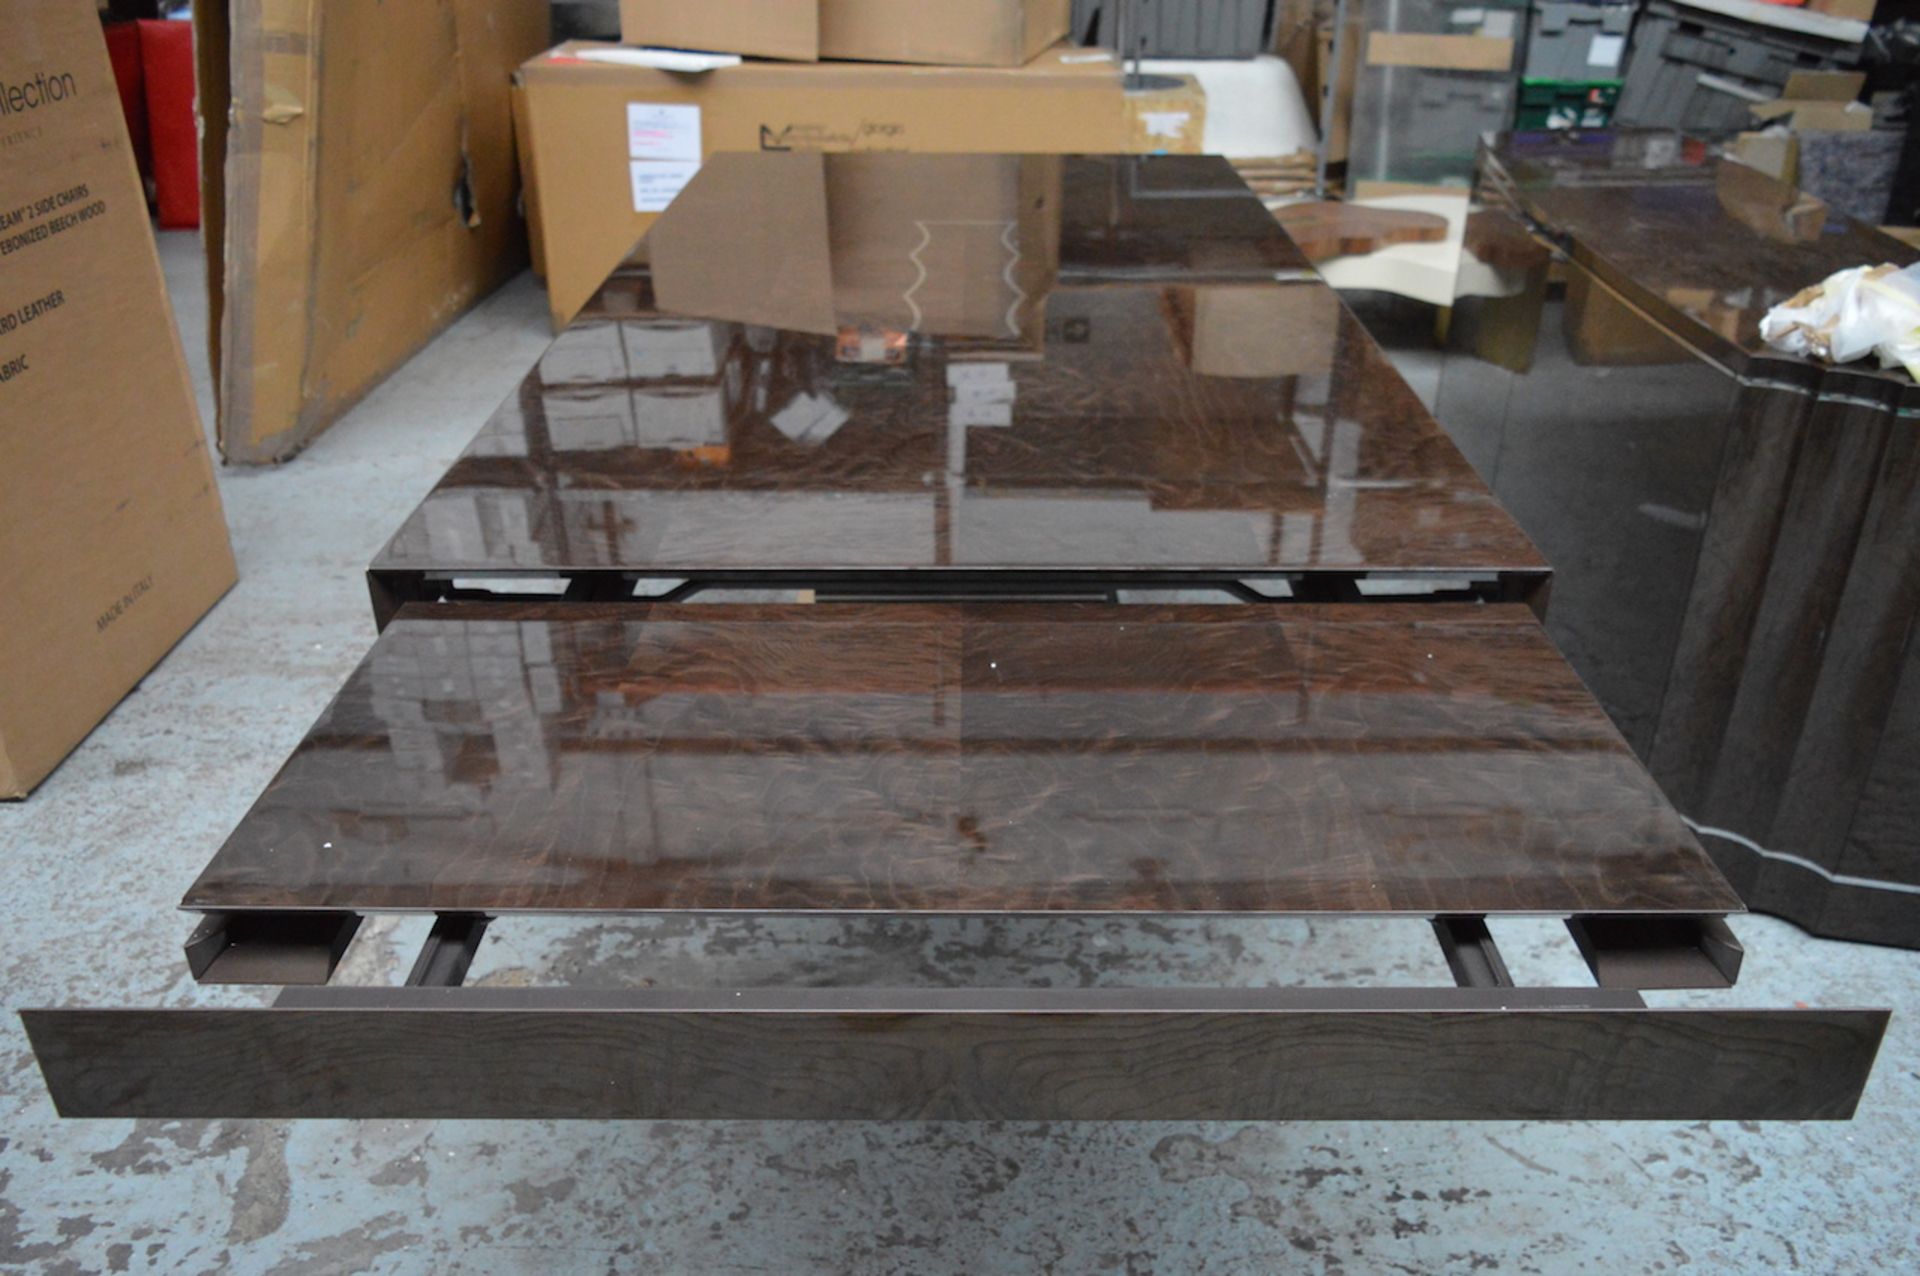 1 x Giorgio Absolute Dining Extension Table 4000 – Mako Japanese Tamos Burl Veneer With a High Gloss - Image 12 of 23